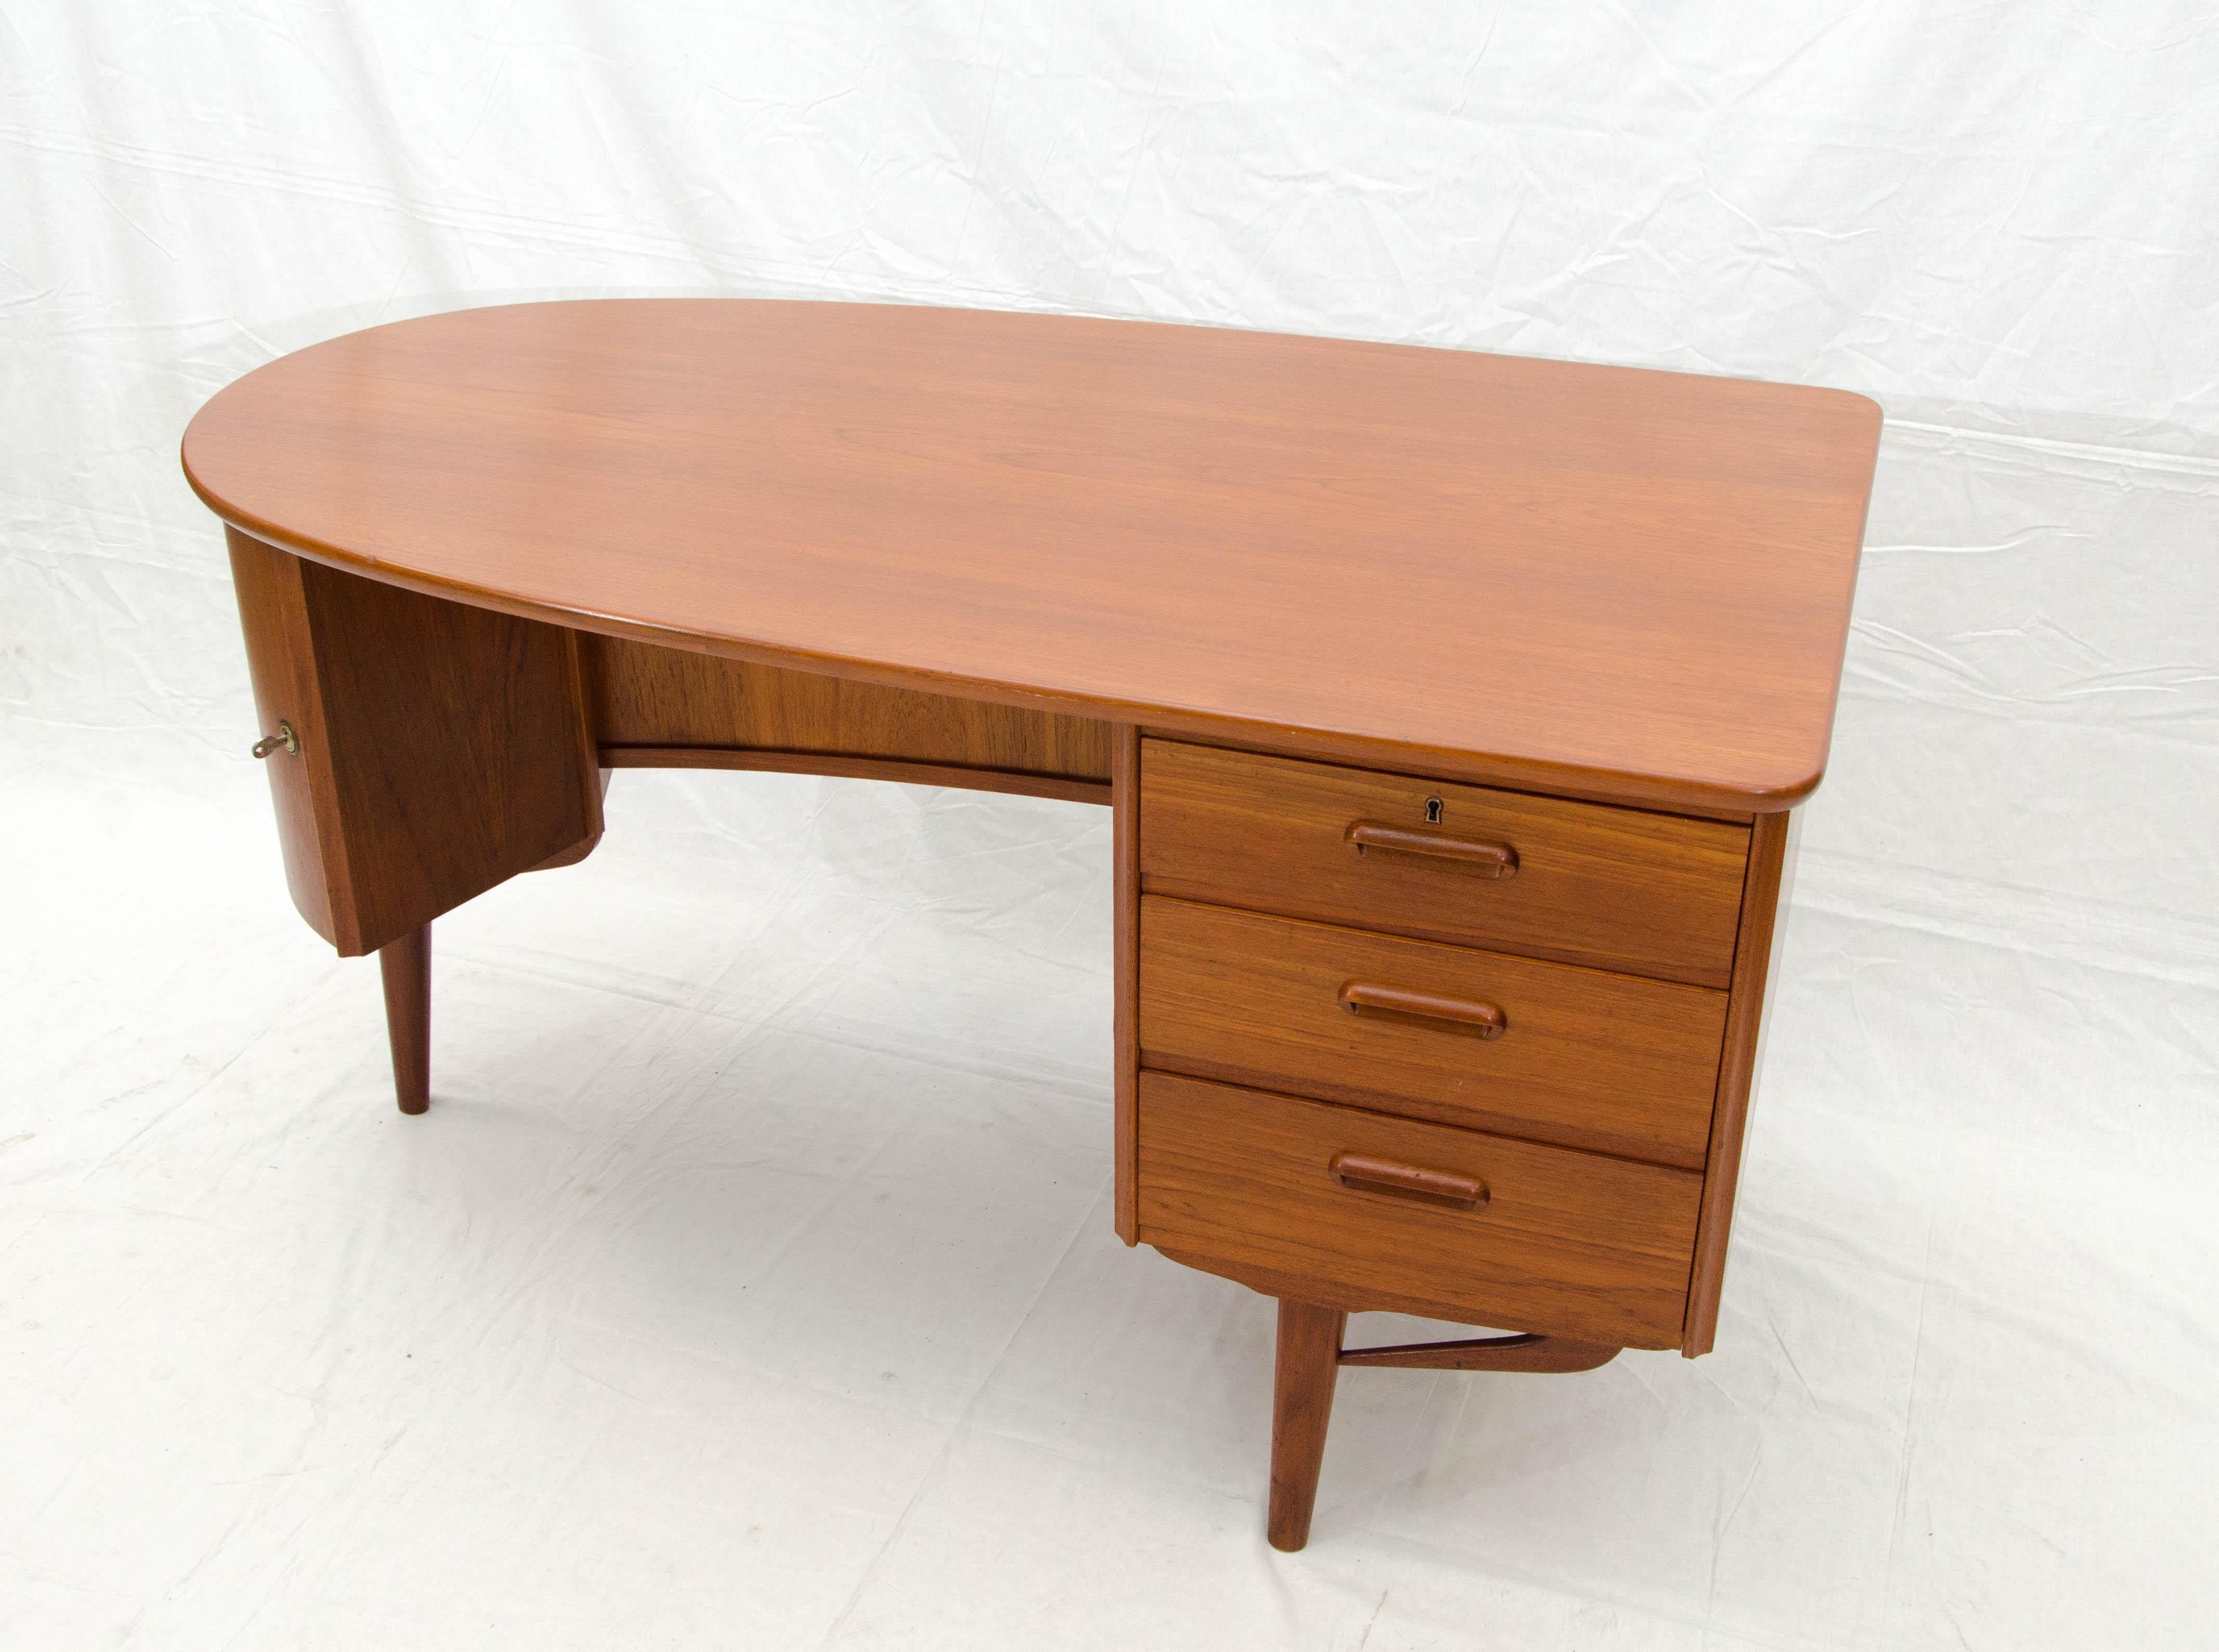 Very nice medium size Danish teak desk with an elliptical curve on one end. There are three storage drawers on one side, the interior drawer depths are 3 1/4